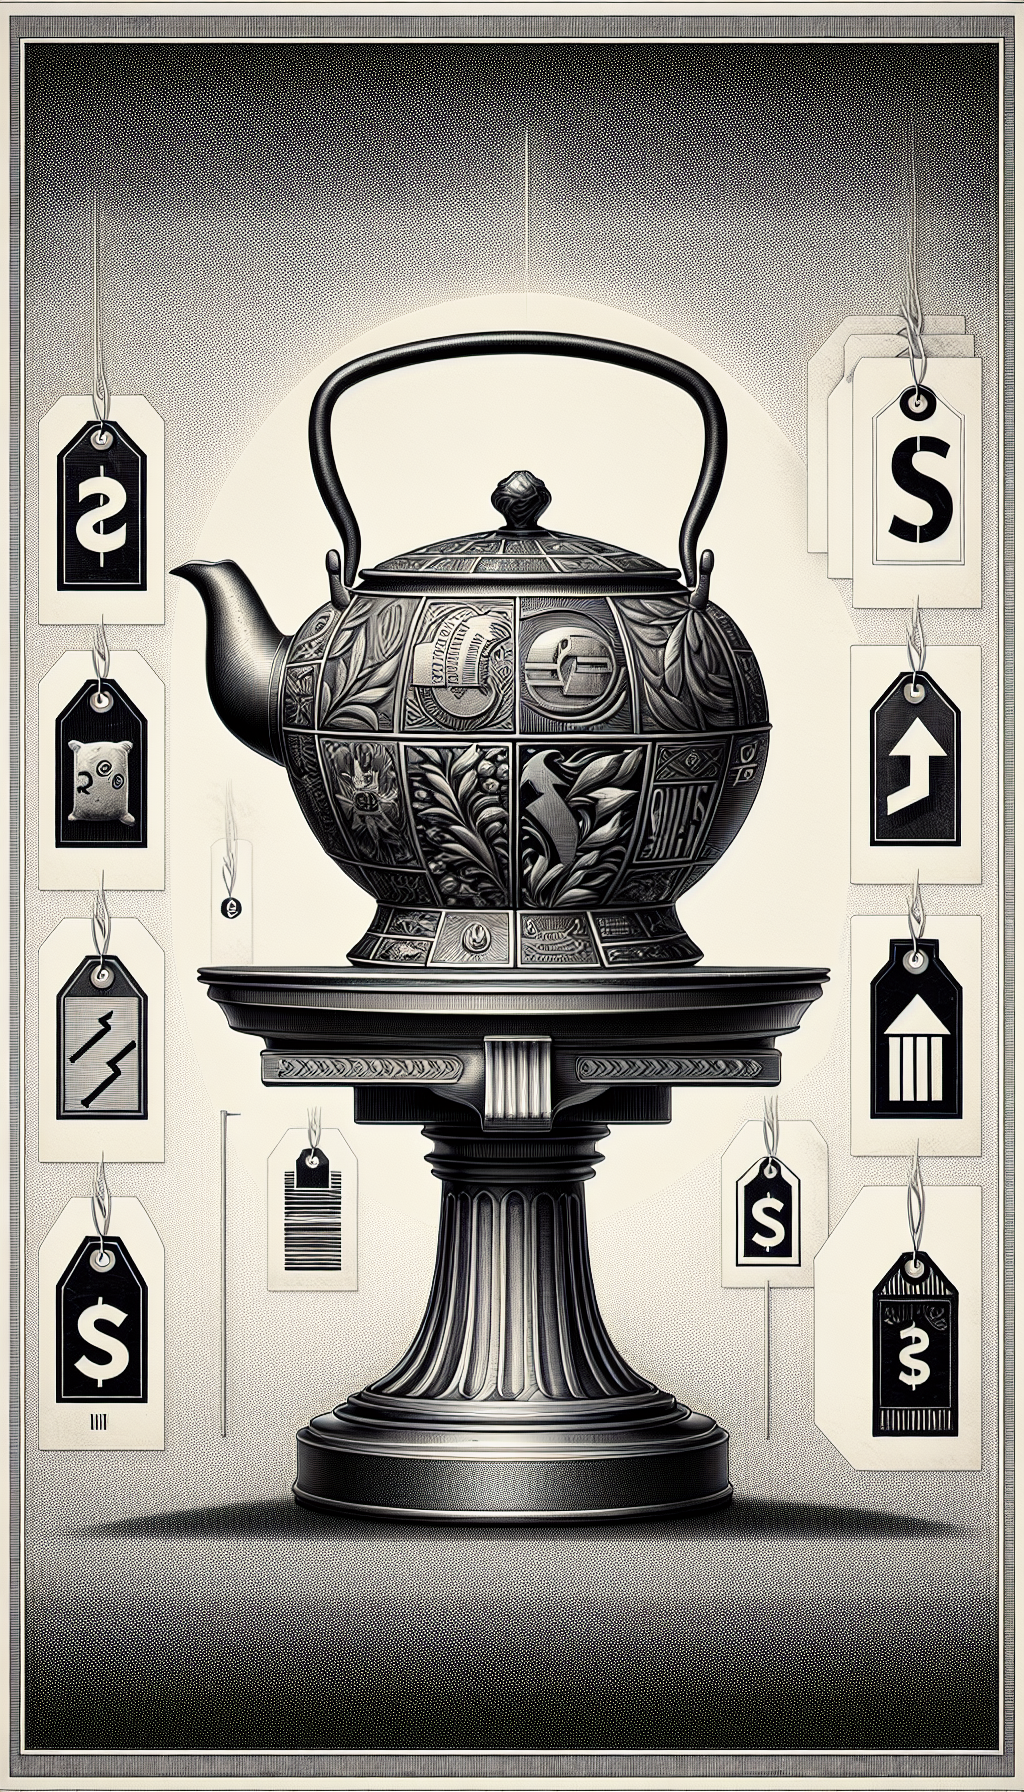 A vintage cast iron kettle sits prominently on a pedestal, its surface etched with renowned manufacturers' logos morphing into dollar signs and up arrows. The pedestal resembles an auction block with tags showing incremental value depending on the brand mark. Different areas of the image are rendered in styles ranging from hyper-realism to abstract, symbolizing diverse perceptions of value.